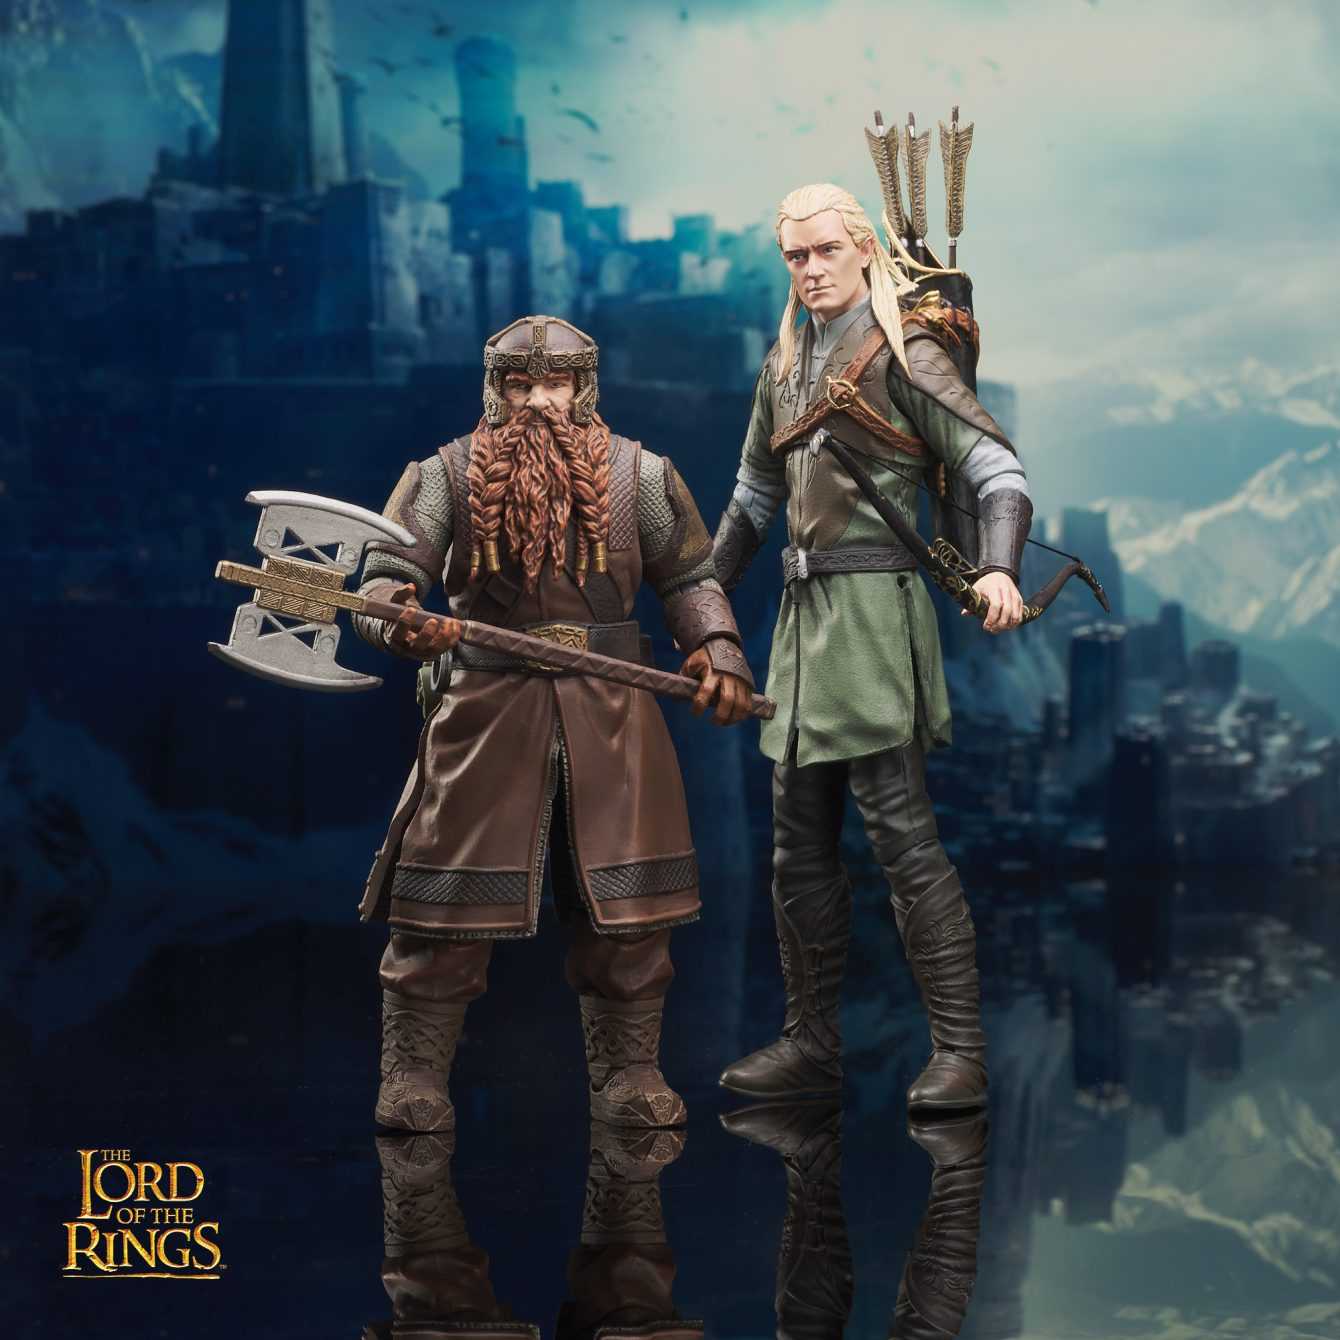 Diamond Select Toys: three new figures dedicated to Superman and The Lord of the Rings coming soon